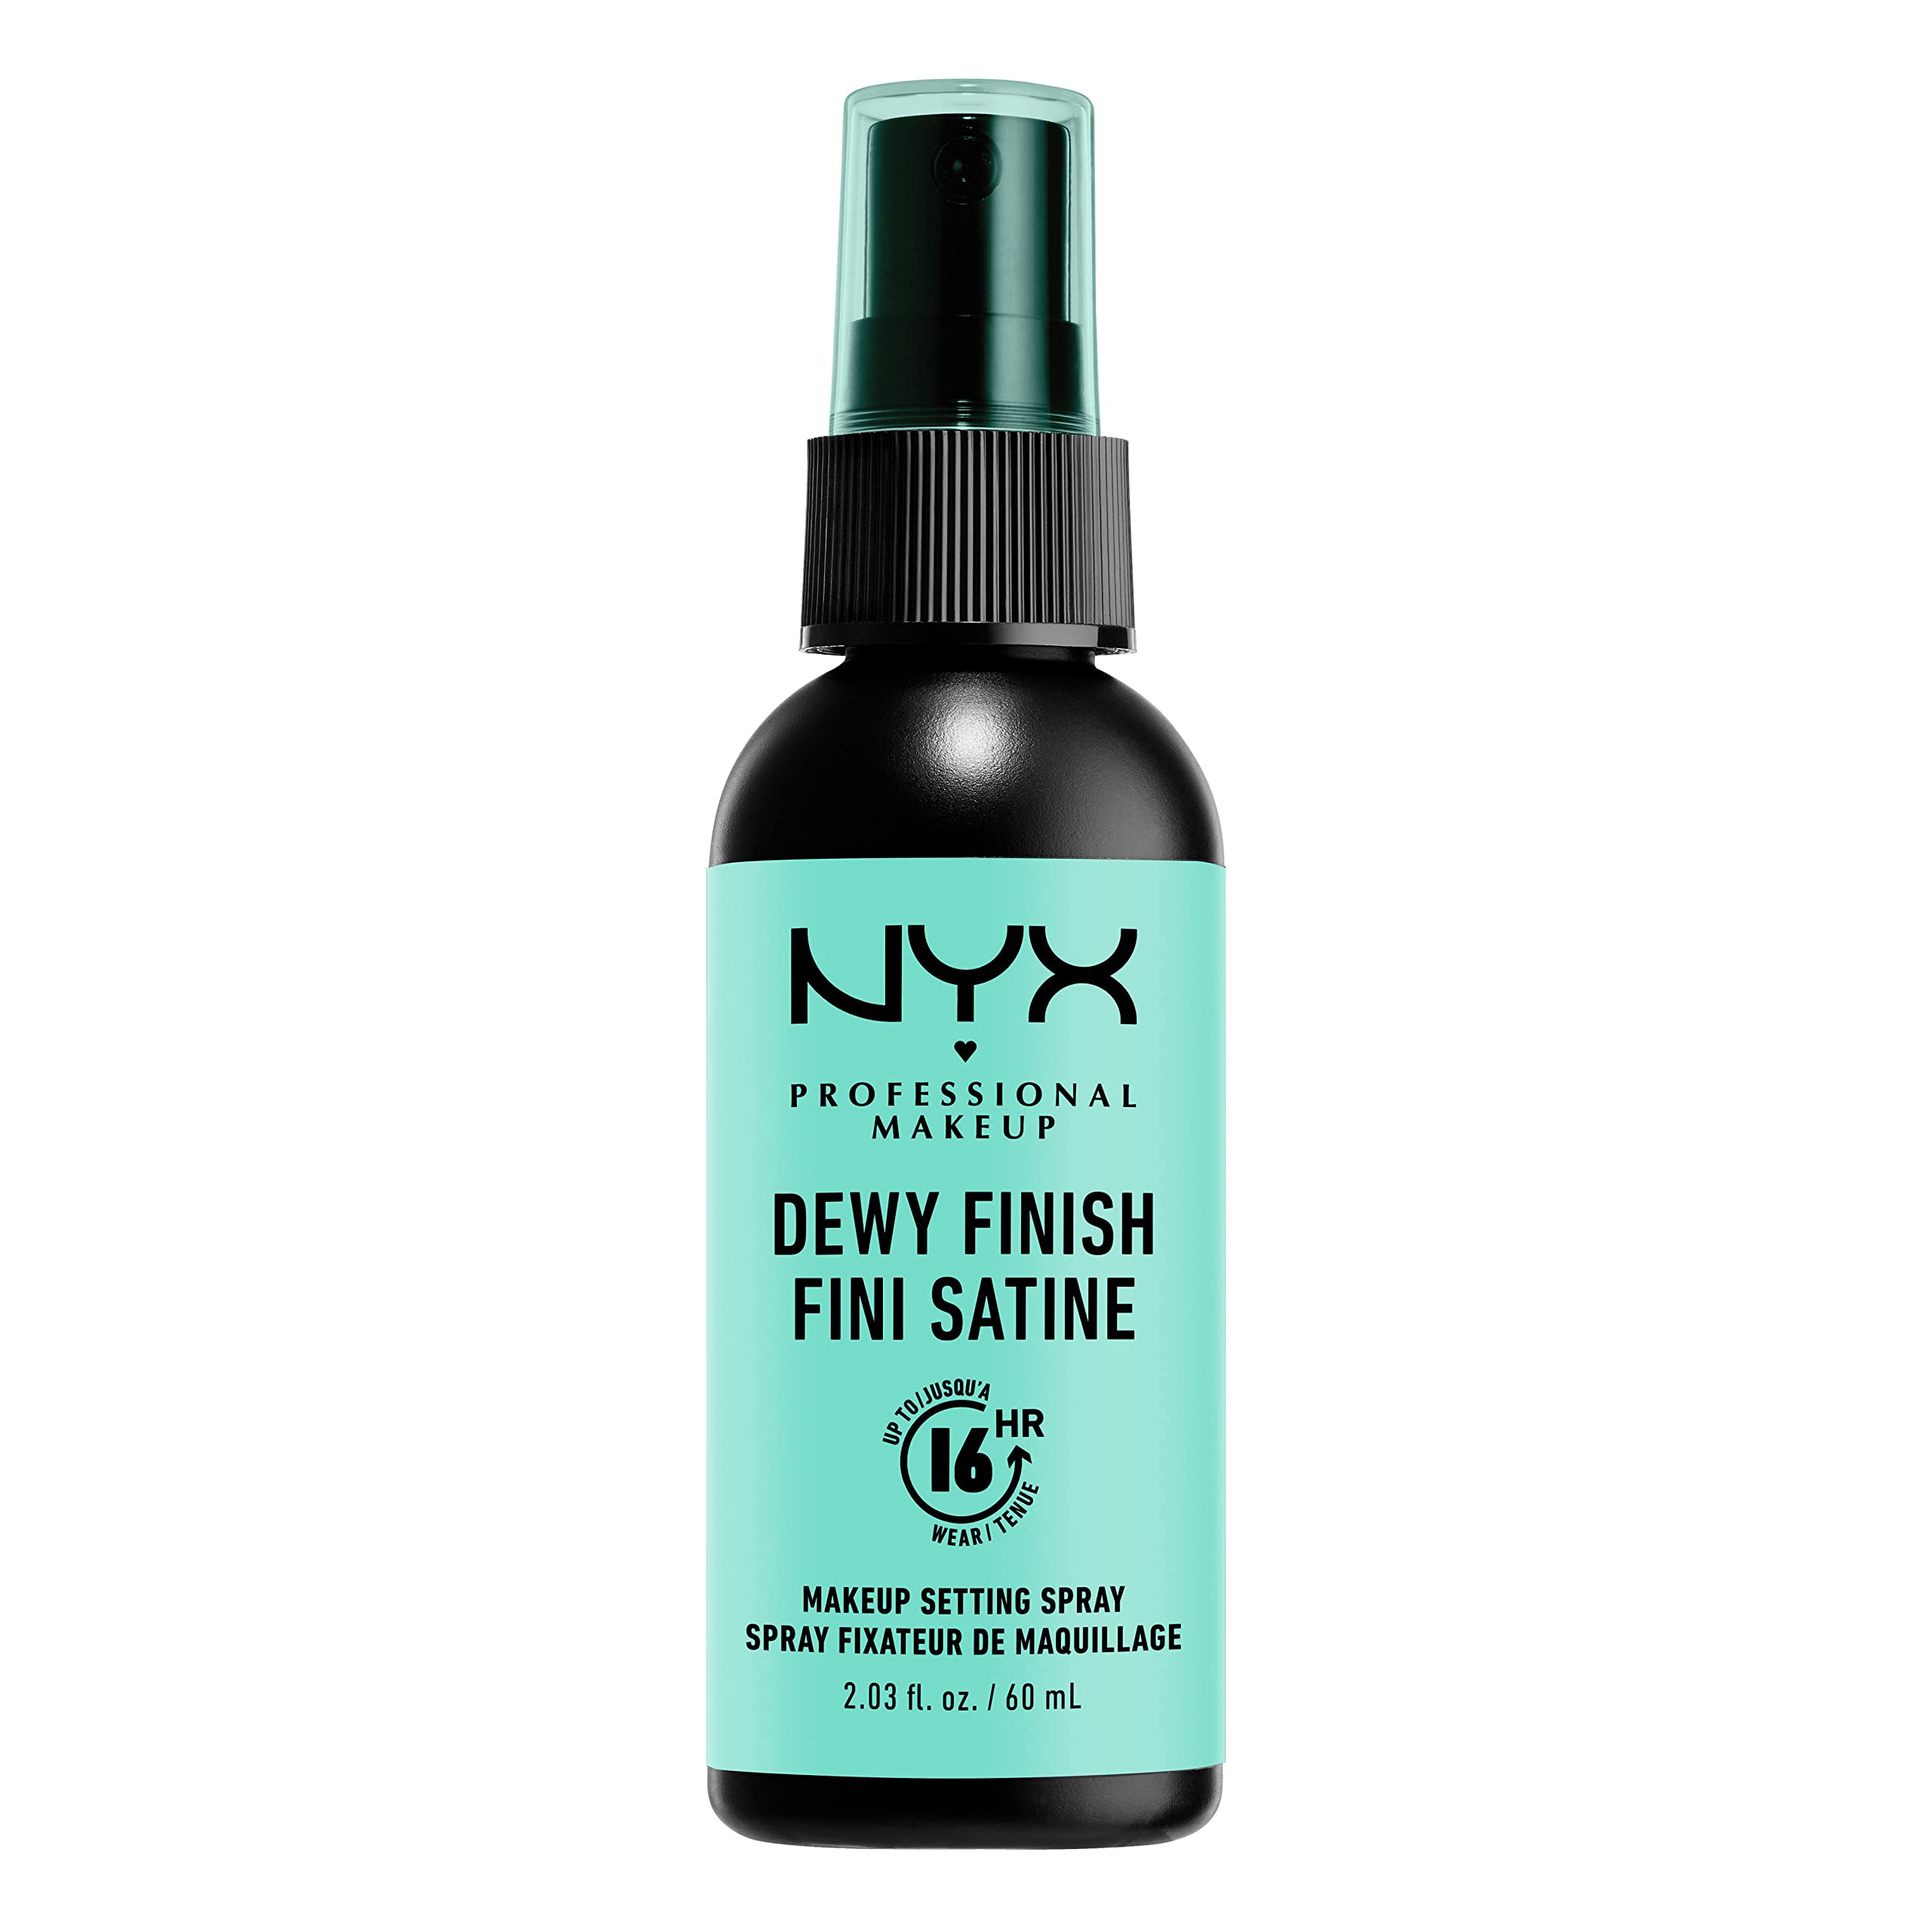 NYX PROFESSIONAL MAKEUP Make Up Setting Spray Dewy Finish, 2.03 Fl Oz (Pack of 1)